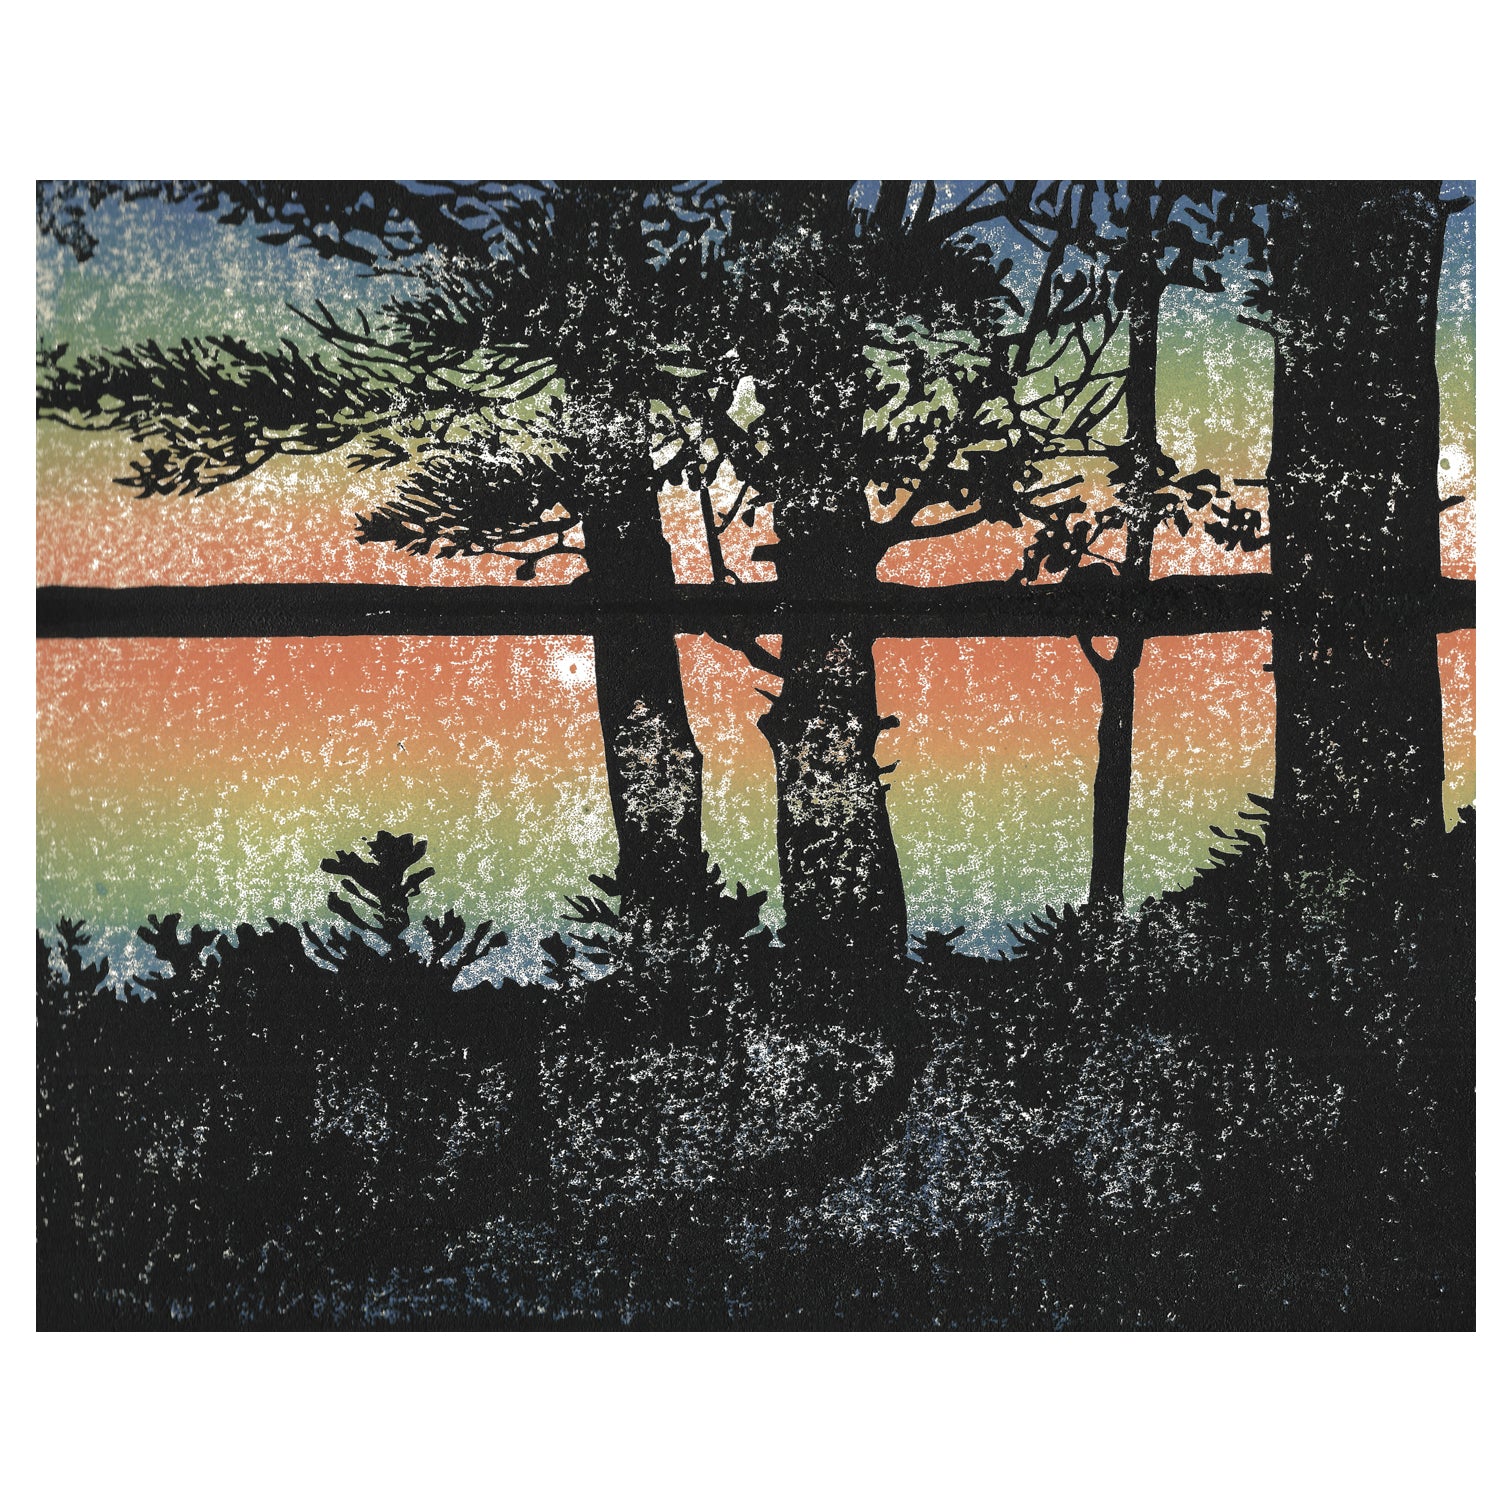 Lakeside living art created by Natalia Wohletz of Peninsula Prints. Sunset is a four-color linoleum block print of a warm, captivating view of a sunset over the lake. 